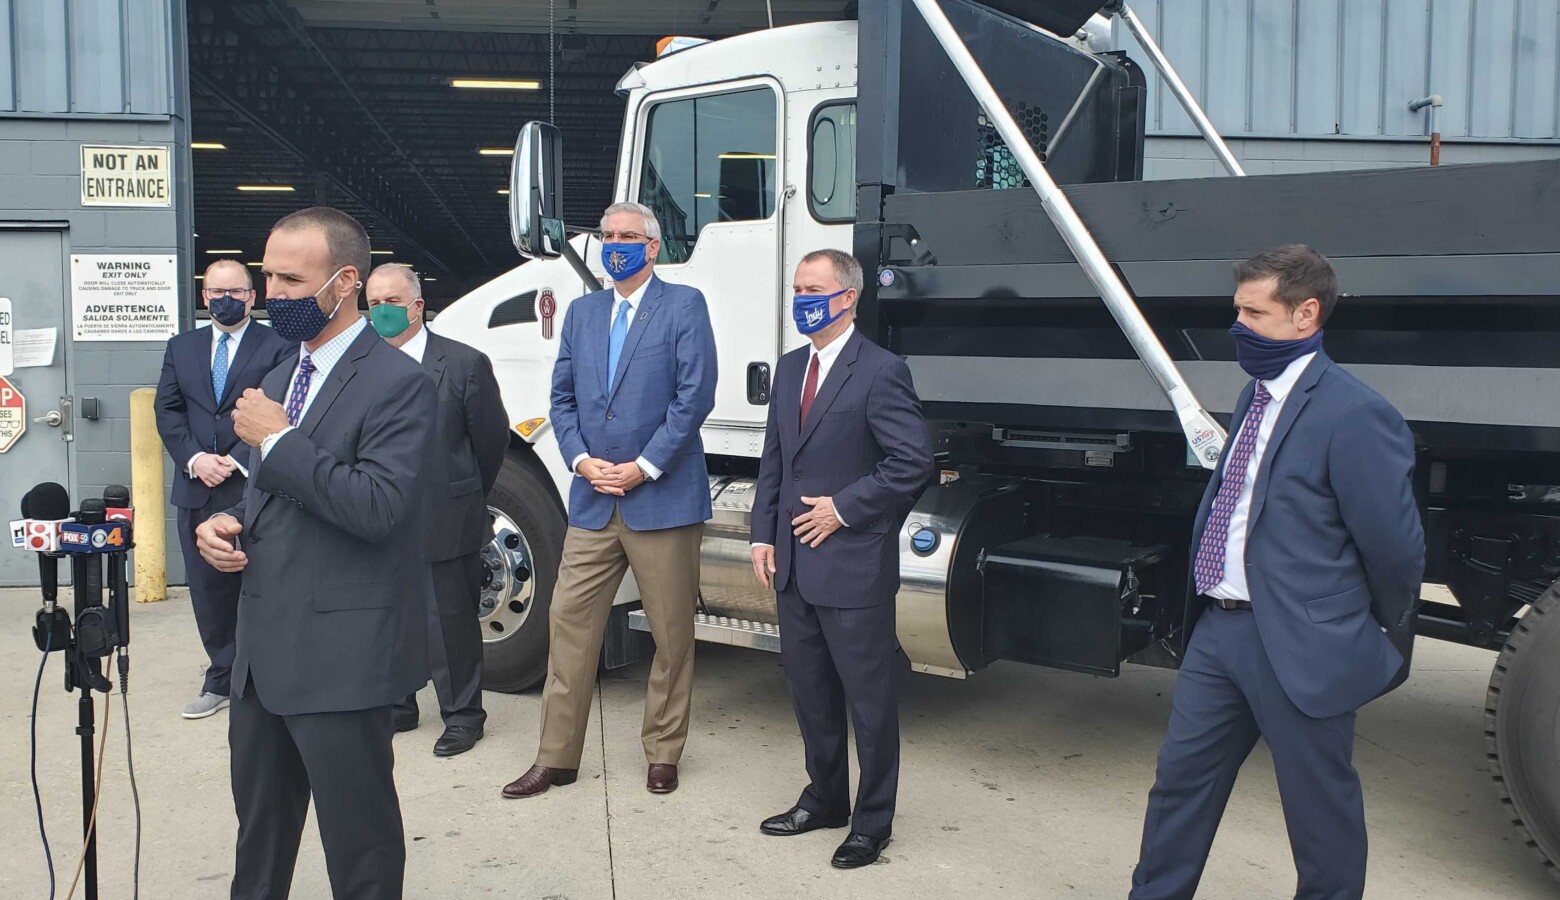 Palmer Trucks CEO John Nichols discusses the company's decision to expand during the coronavirus pandemic with Gov. Eric Holcomb, Indianapolis Mayor Joe Hogsett and other officials in attendance. (Samantha Horton/IPB News)